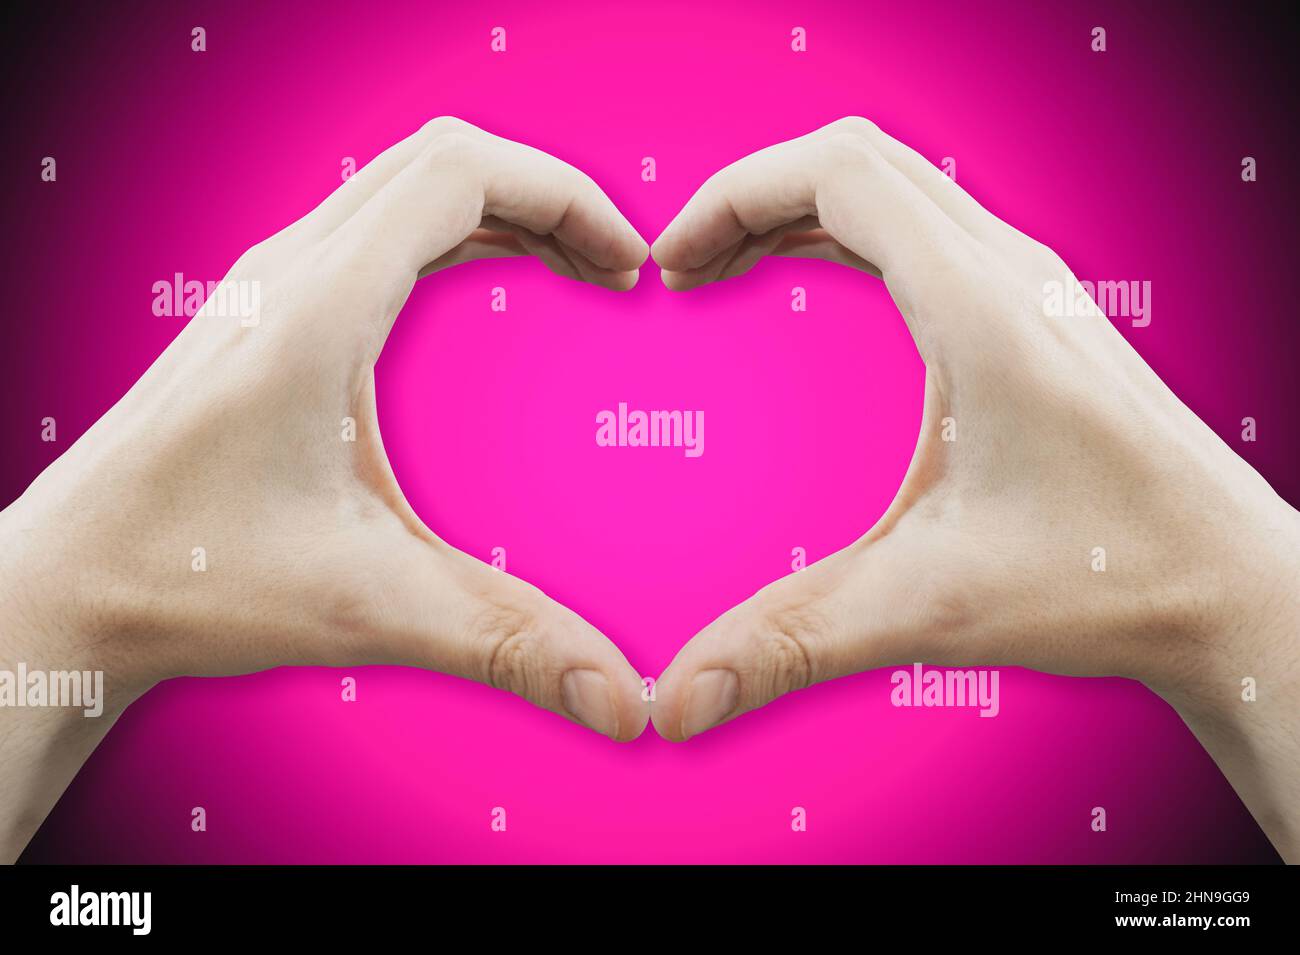 Hands Forming Heart Shape Pink Background Love Concept Stock Photo